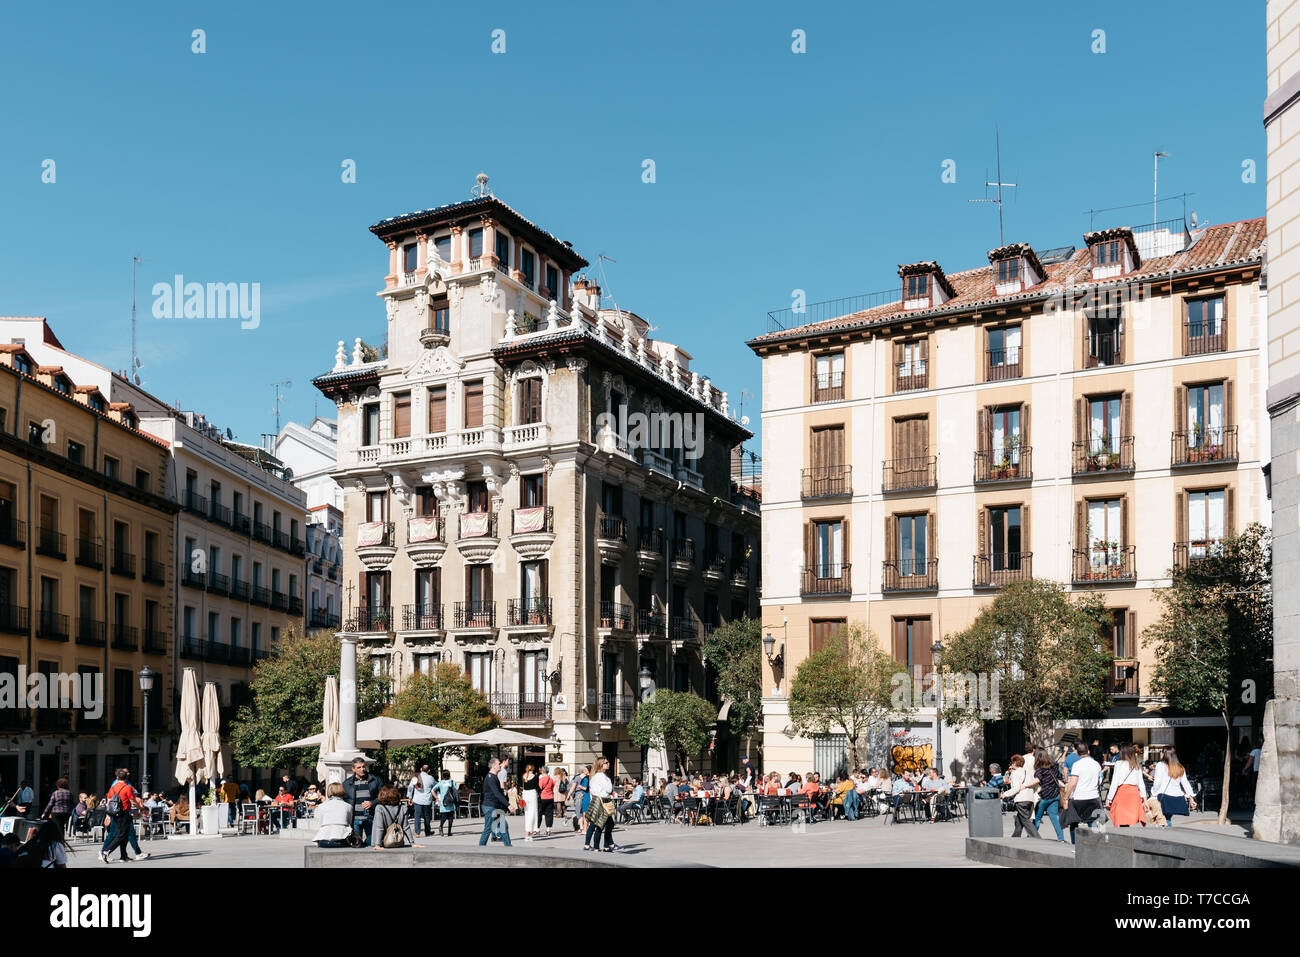 Madrid, Spain - April 14, 2019: People enjoying in Ramales Square in historic city centre. The Quarter of Madrid of the Austrians Stock Photo